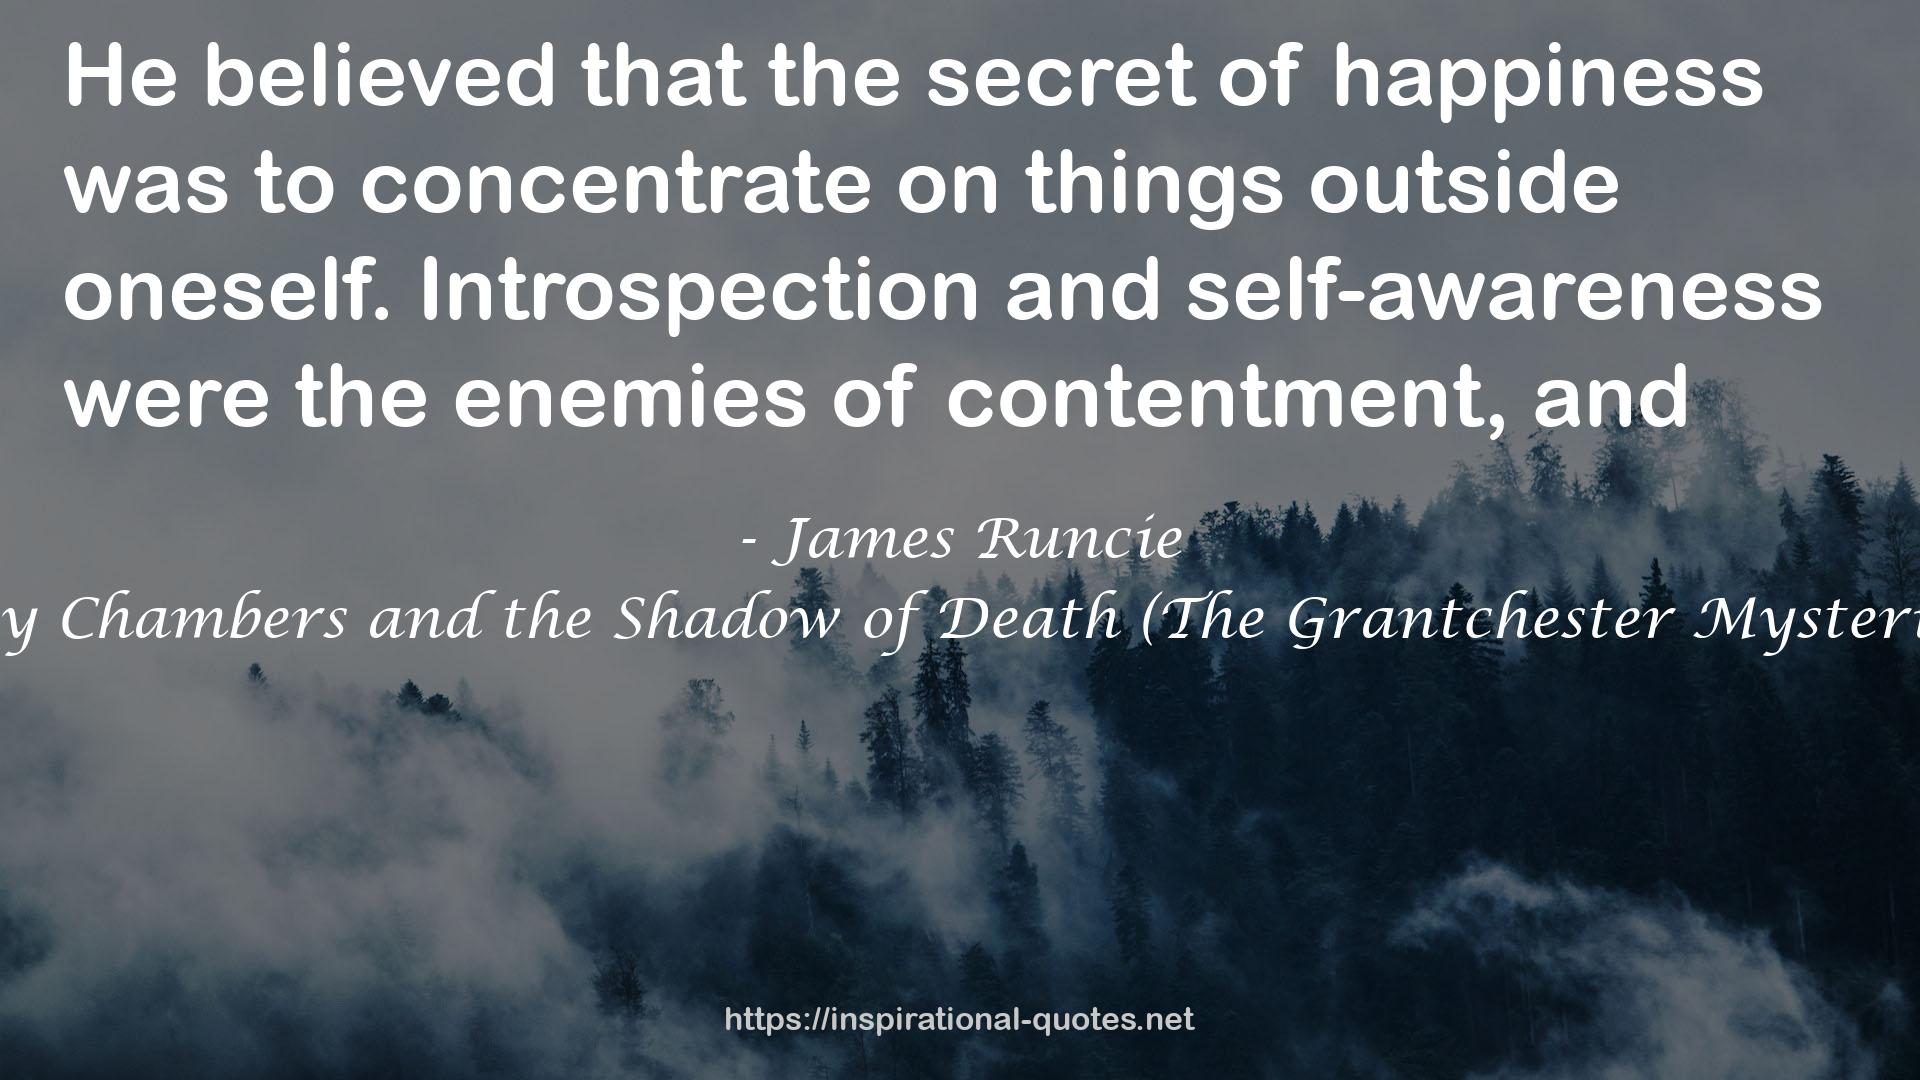 Sidney Chambers and the Shadow of Death (The Grantchester Mysteries #1) QUOTES